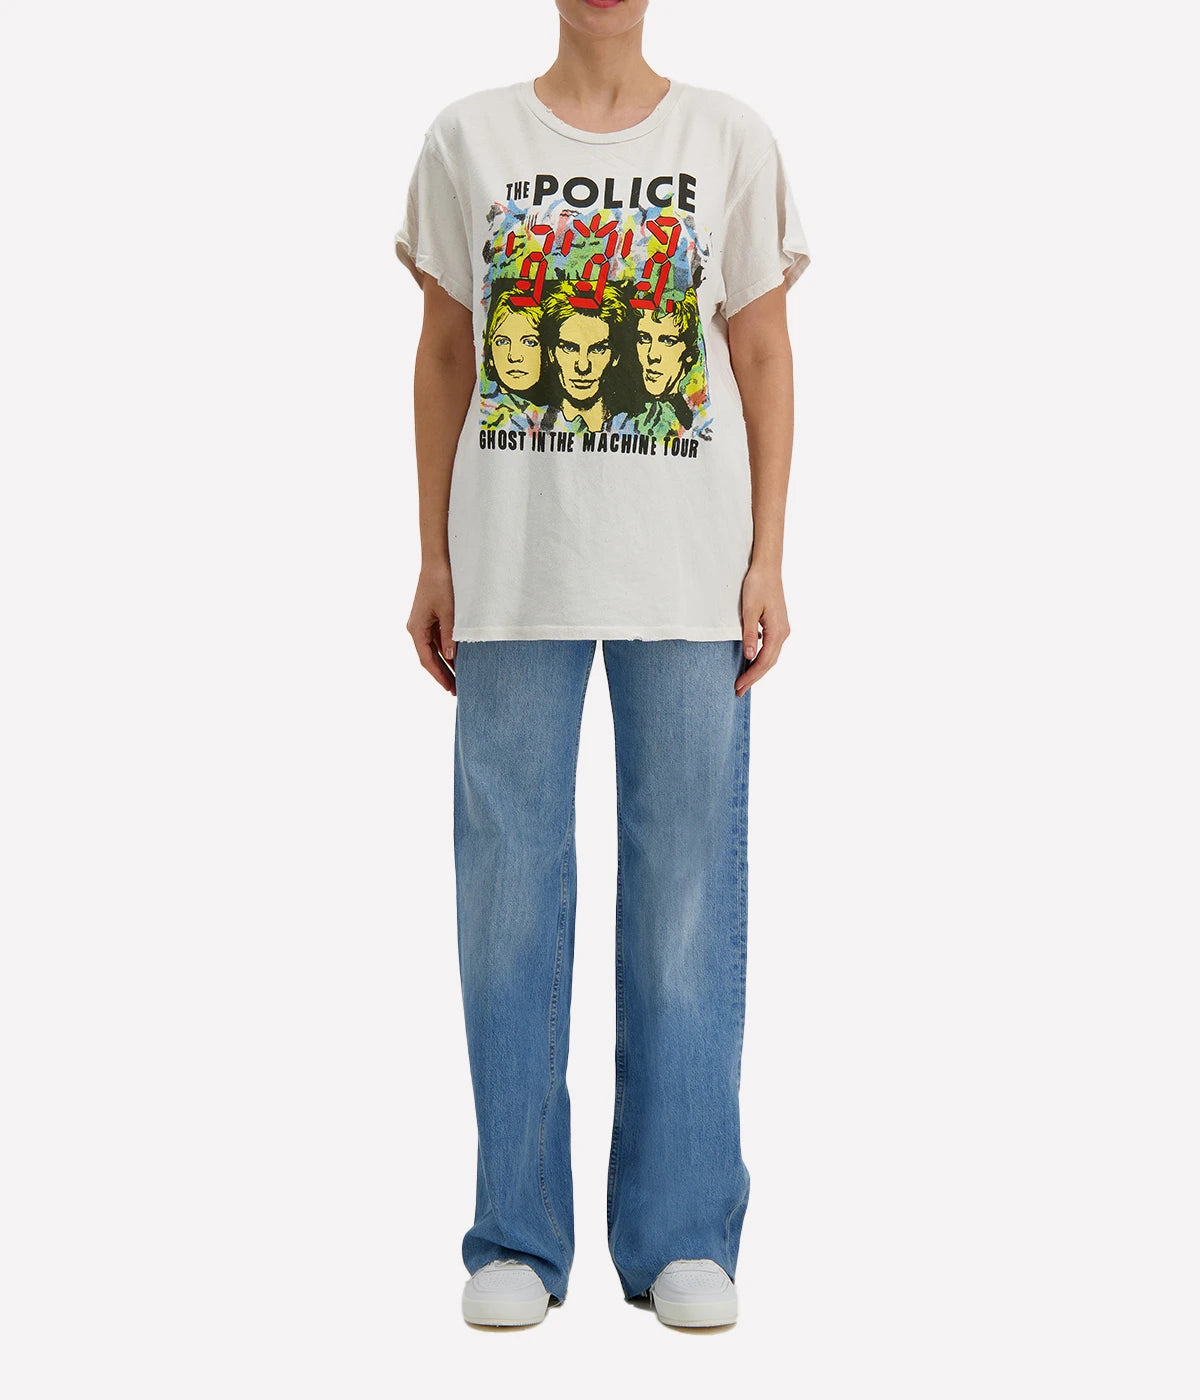 The Police T-Shirt in Vintage White